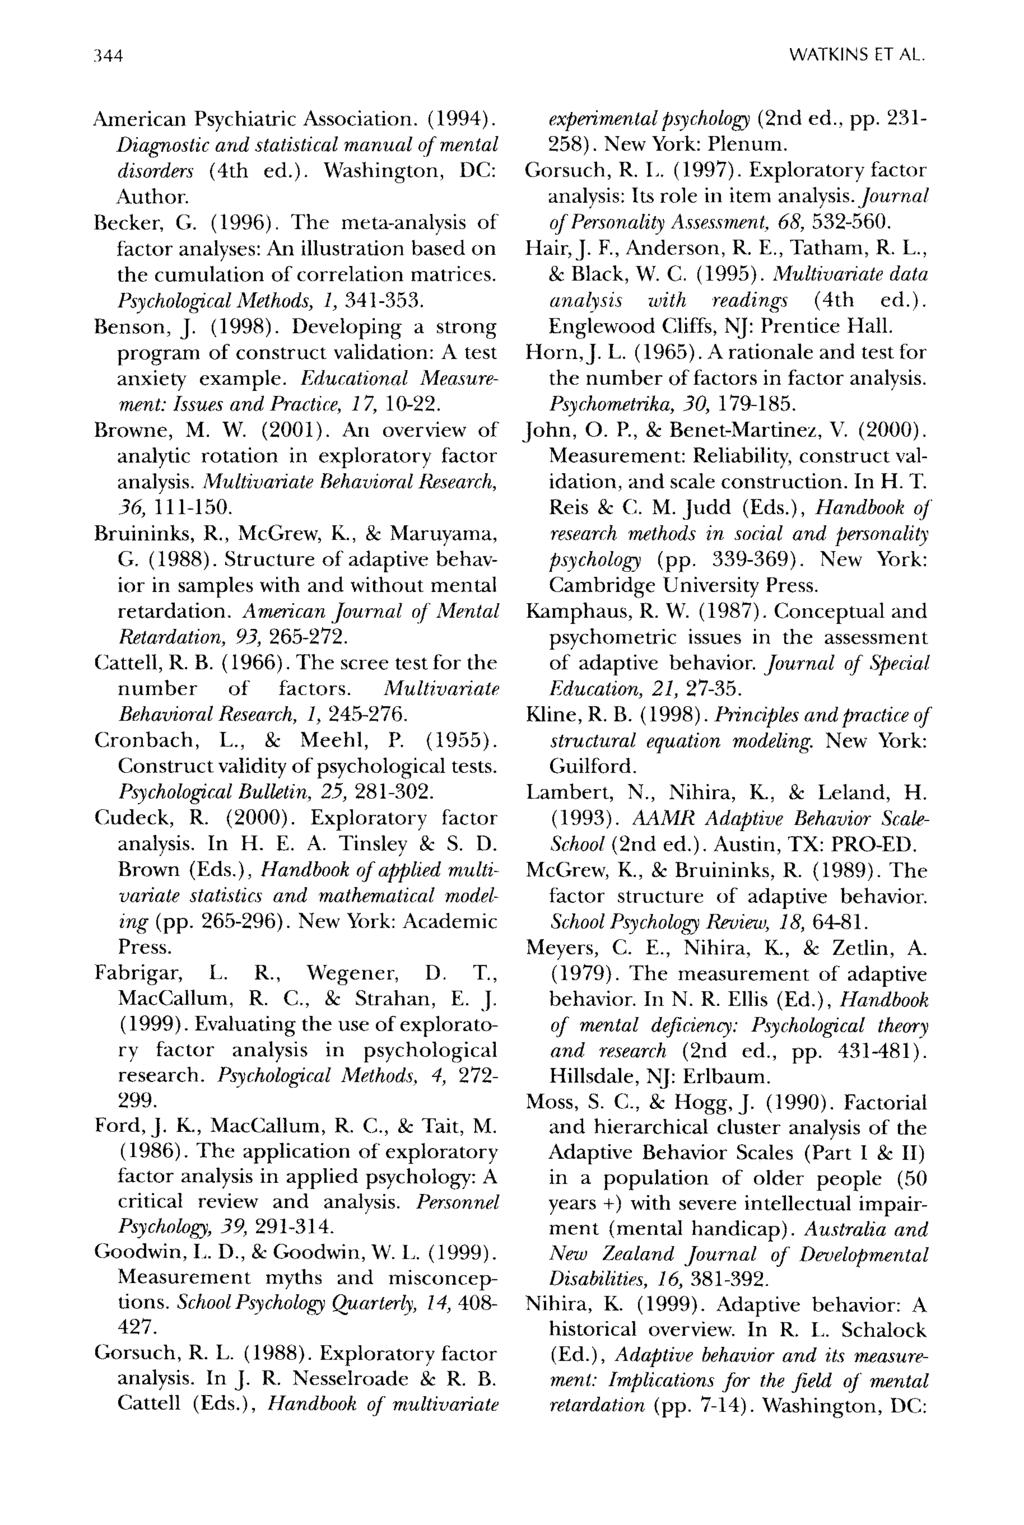 344 WATKINS ET AL. American Psychiatric Association. (1994). Diag;nostic and statistical manual of mental disorders (4th ed.). Washington, DC: Author. Becker, G. (1996).